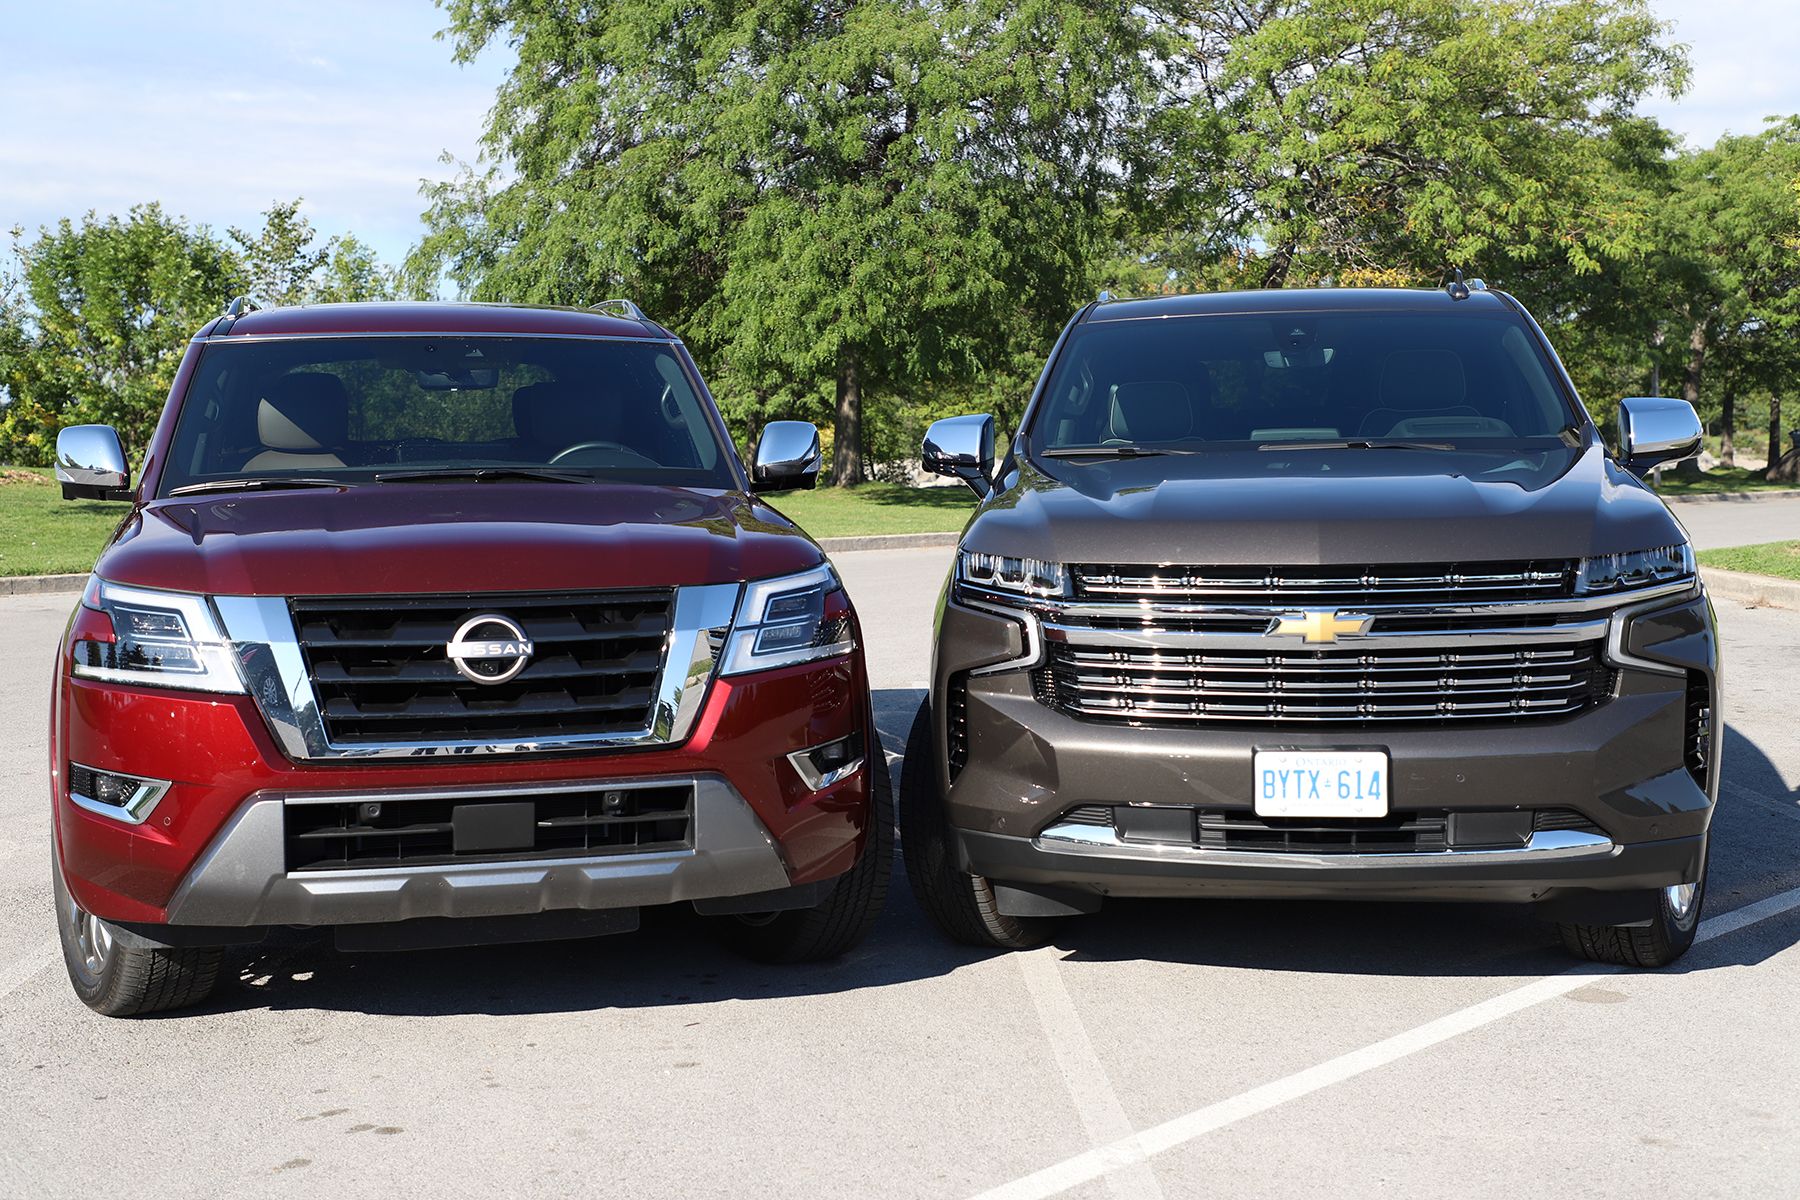 GM hopes to keep No. 1 lead in big SUVs with revamped Chevy Tahoe, Suburban